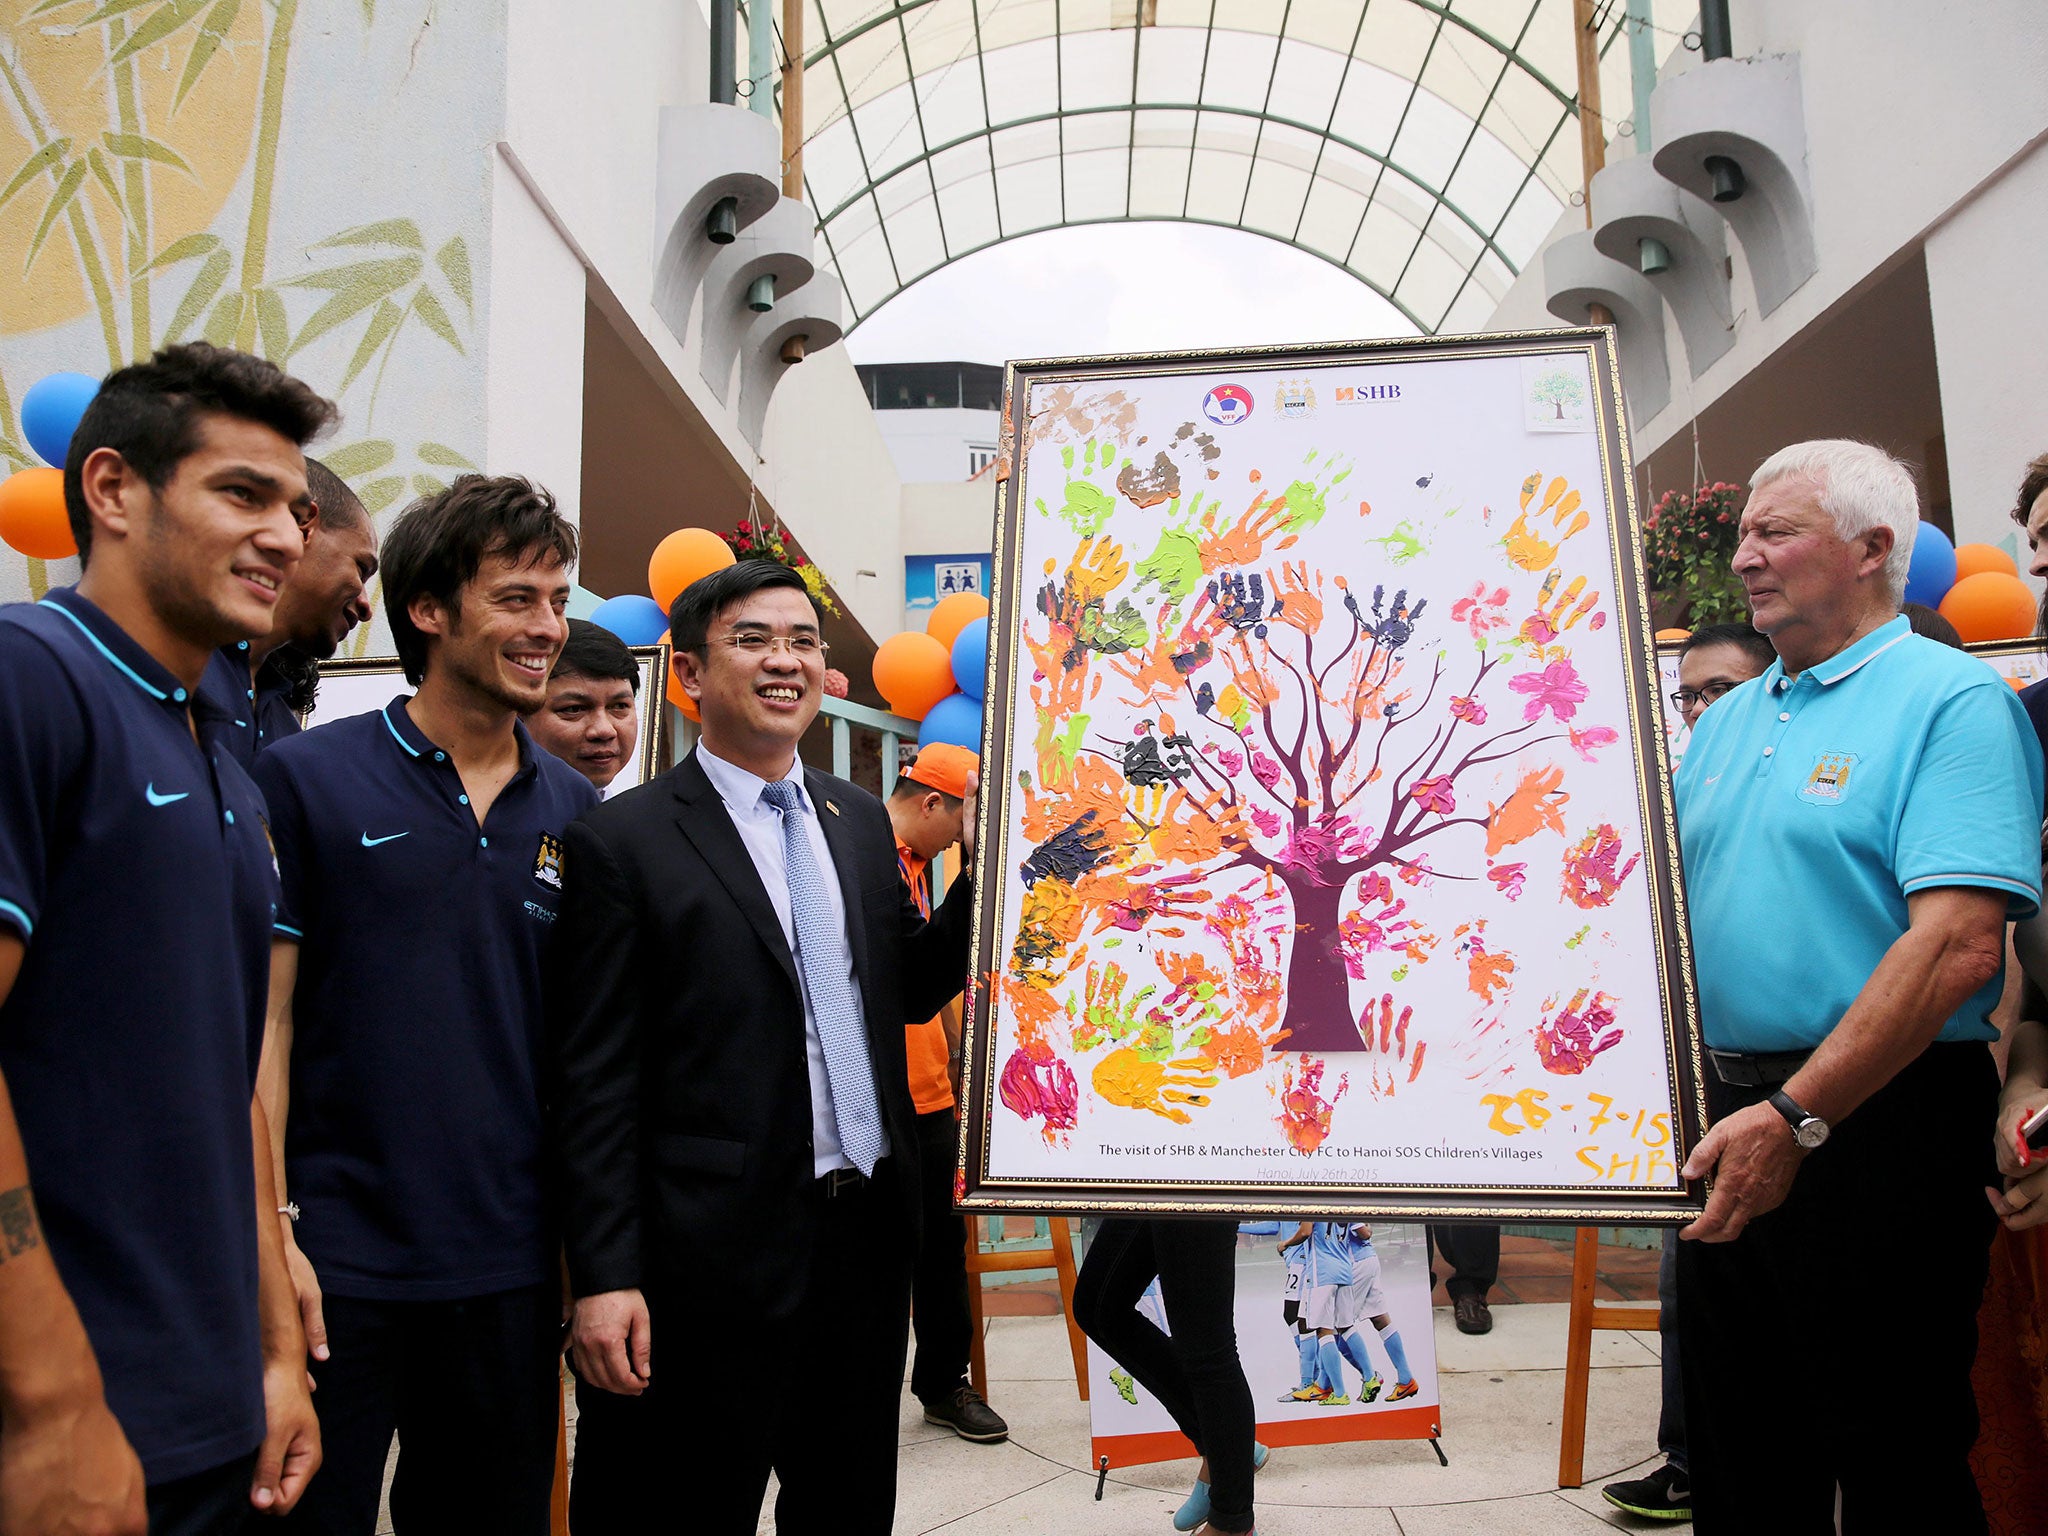 Manchester City players Marcos Lopes and David Silva join Saigon-Hanoi Bank general director Nguyen Van Le and City ambassador Mike Summerbee at a promotional event in Hanoi